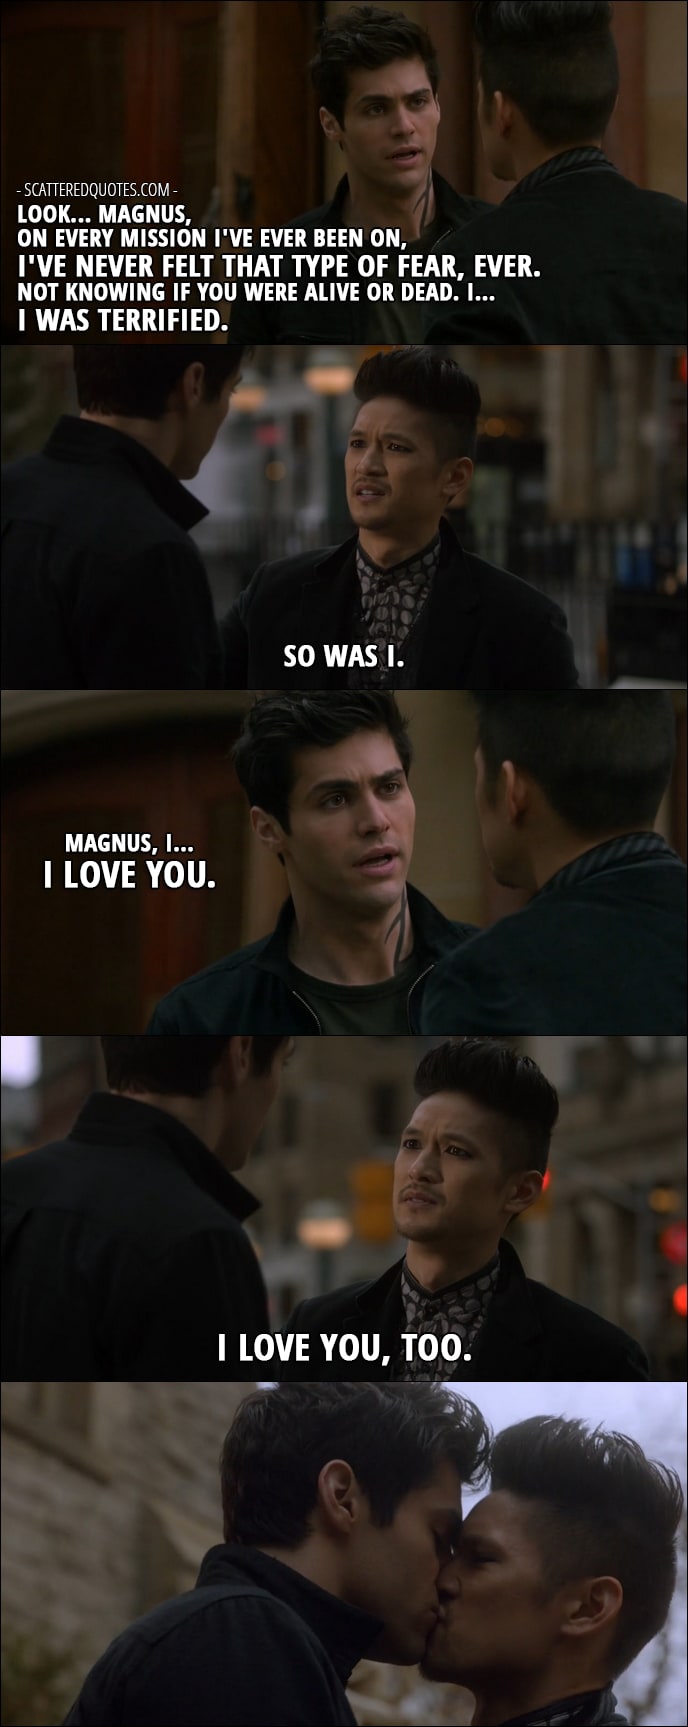 Shadowhunters Quotes from 'By the Light of Dawn' (2x10) - Alec Lightwood: Look... Magnus, on every mission I've ever been on, I've never felt that type of fear, ever. Not knowing if you were alive or dead. I... I was terrified. Magnus Bane: So was I. Alec Lightwood: Magnus, I... I love you. Magnus Bane: I love you, too.